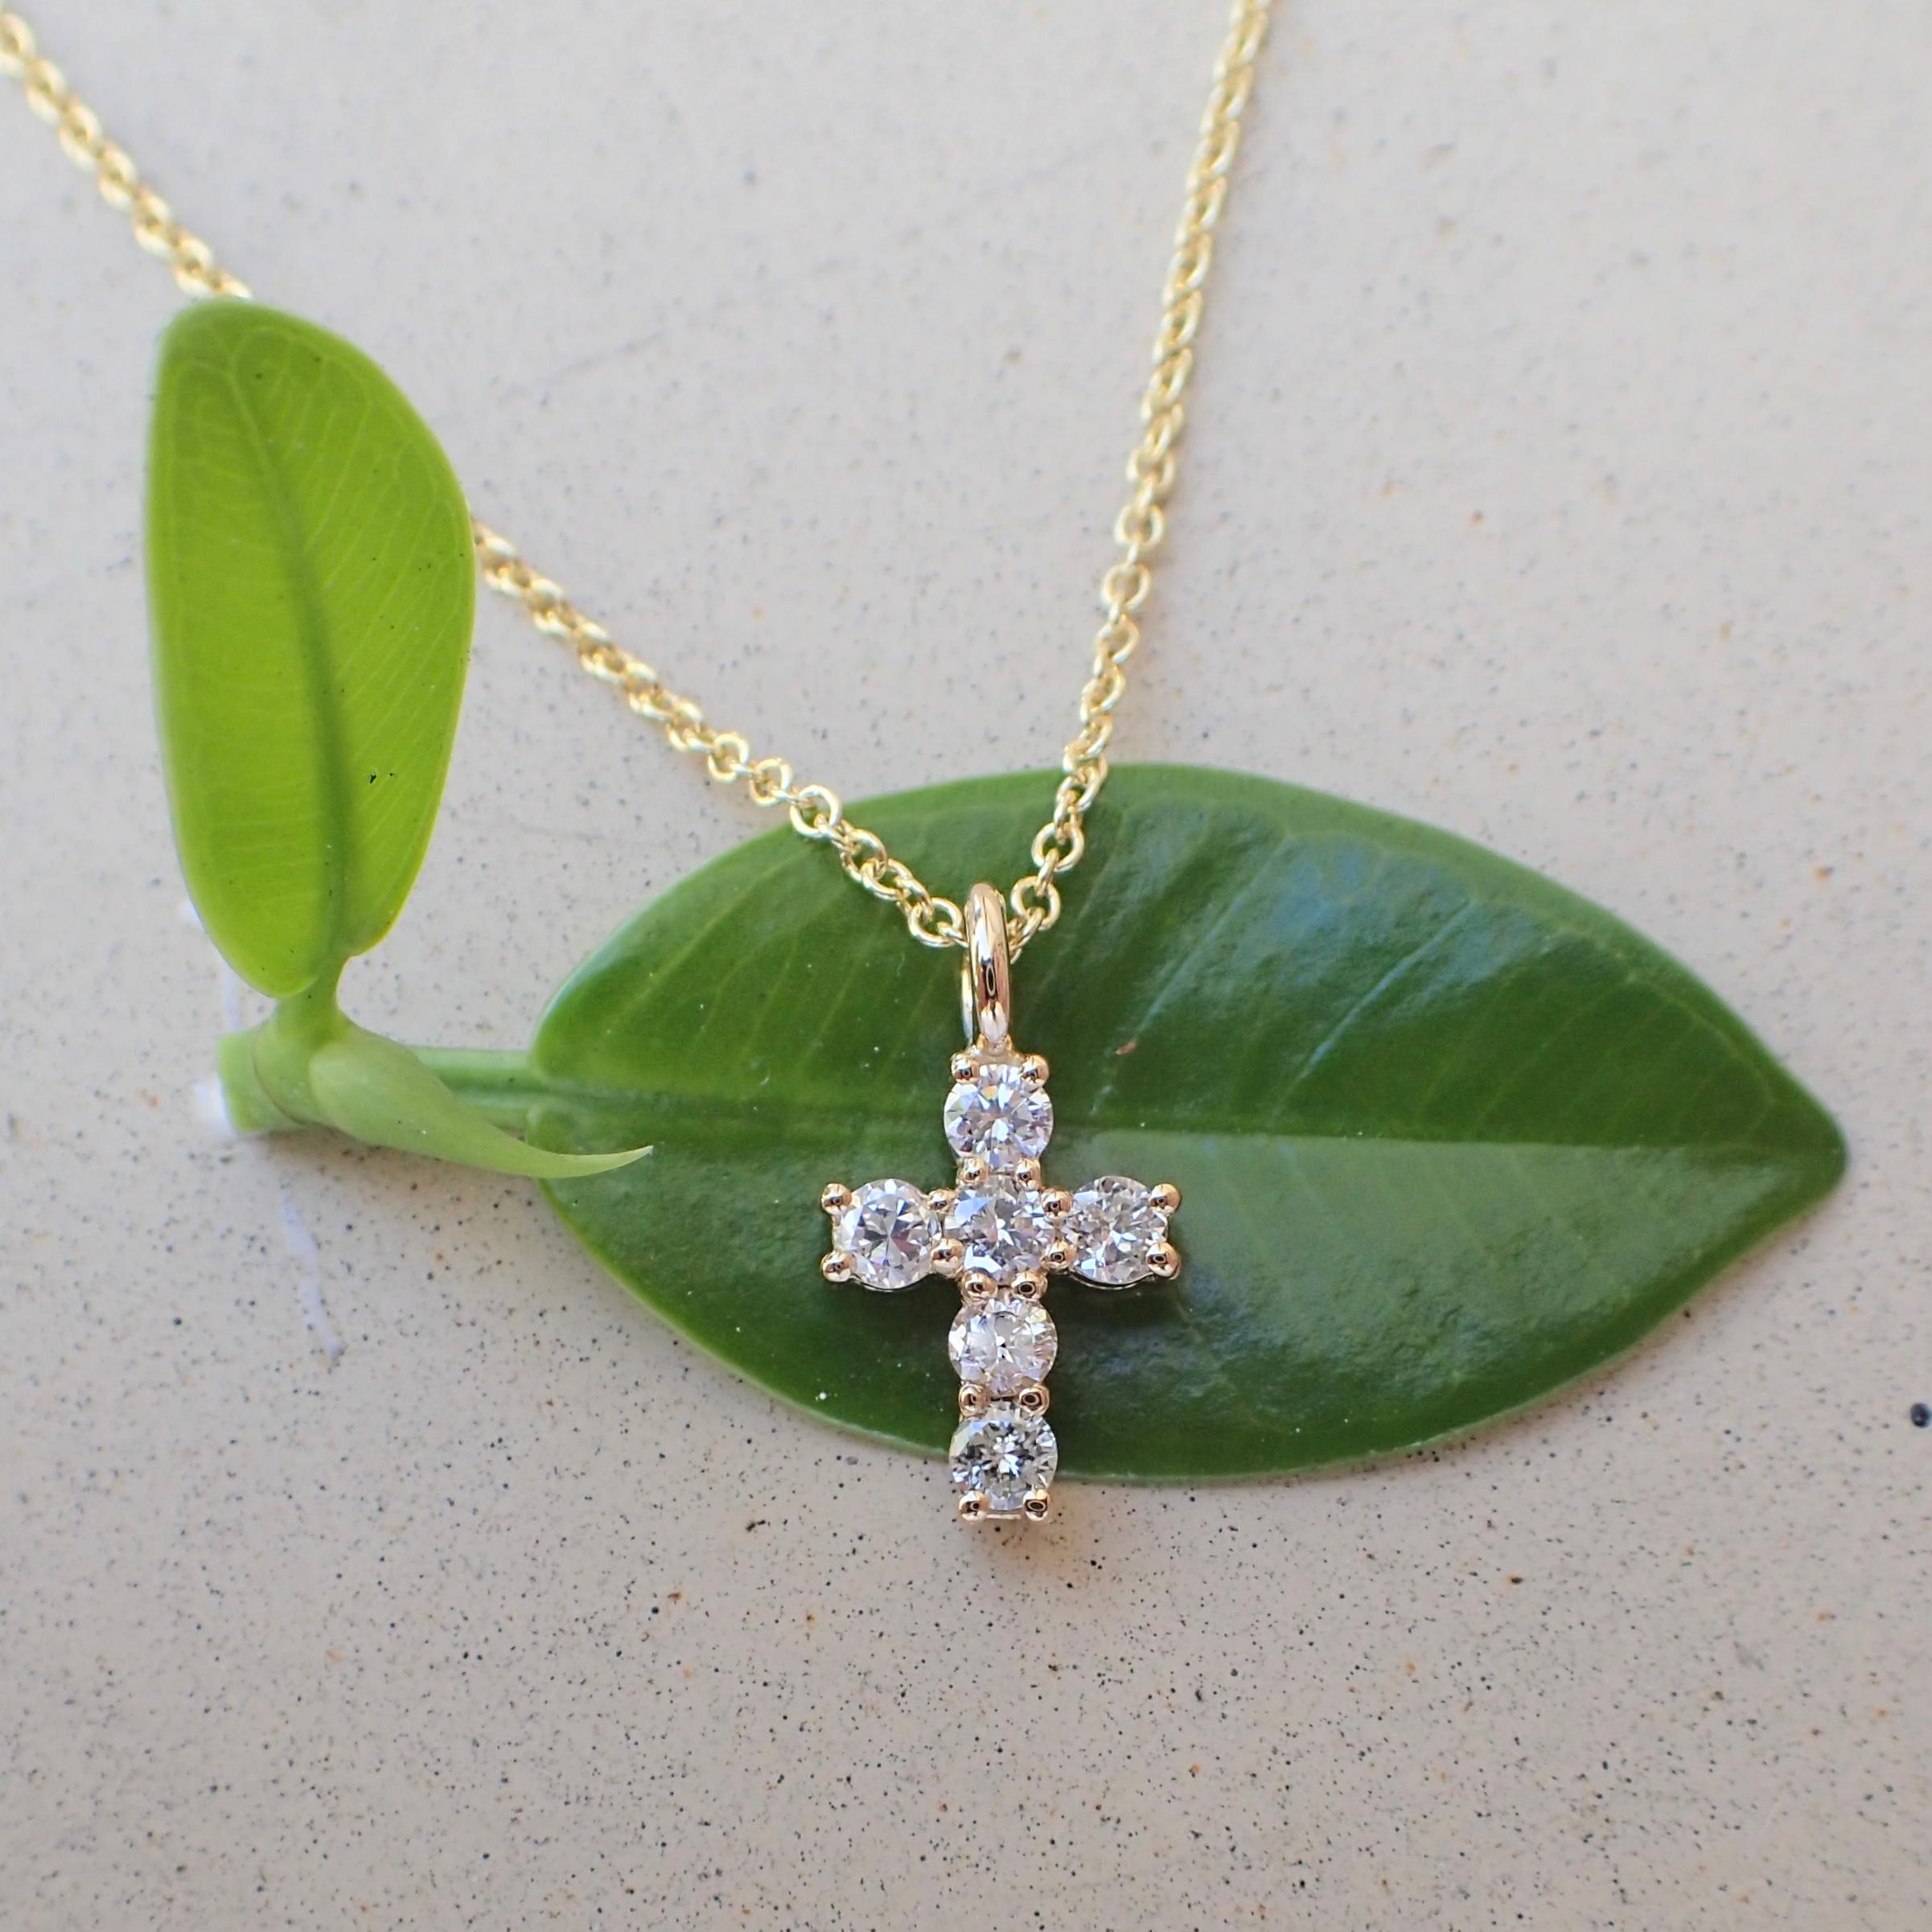 18k yellow gold tiny cross with six (6) Round Brilliant Cut diamonds weighing a total of 0.30 carats with Color Grade G-H and Clarity Grade SI. The cross hangs from a 16